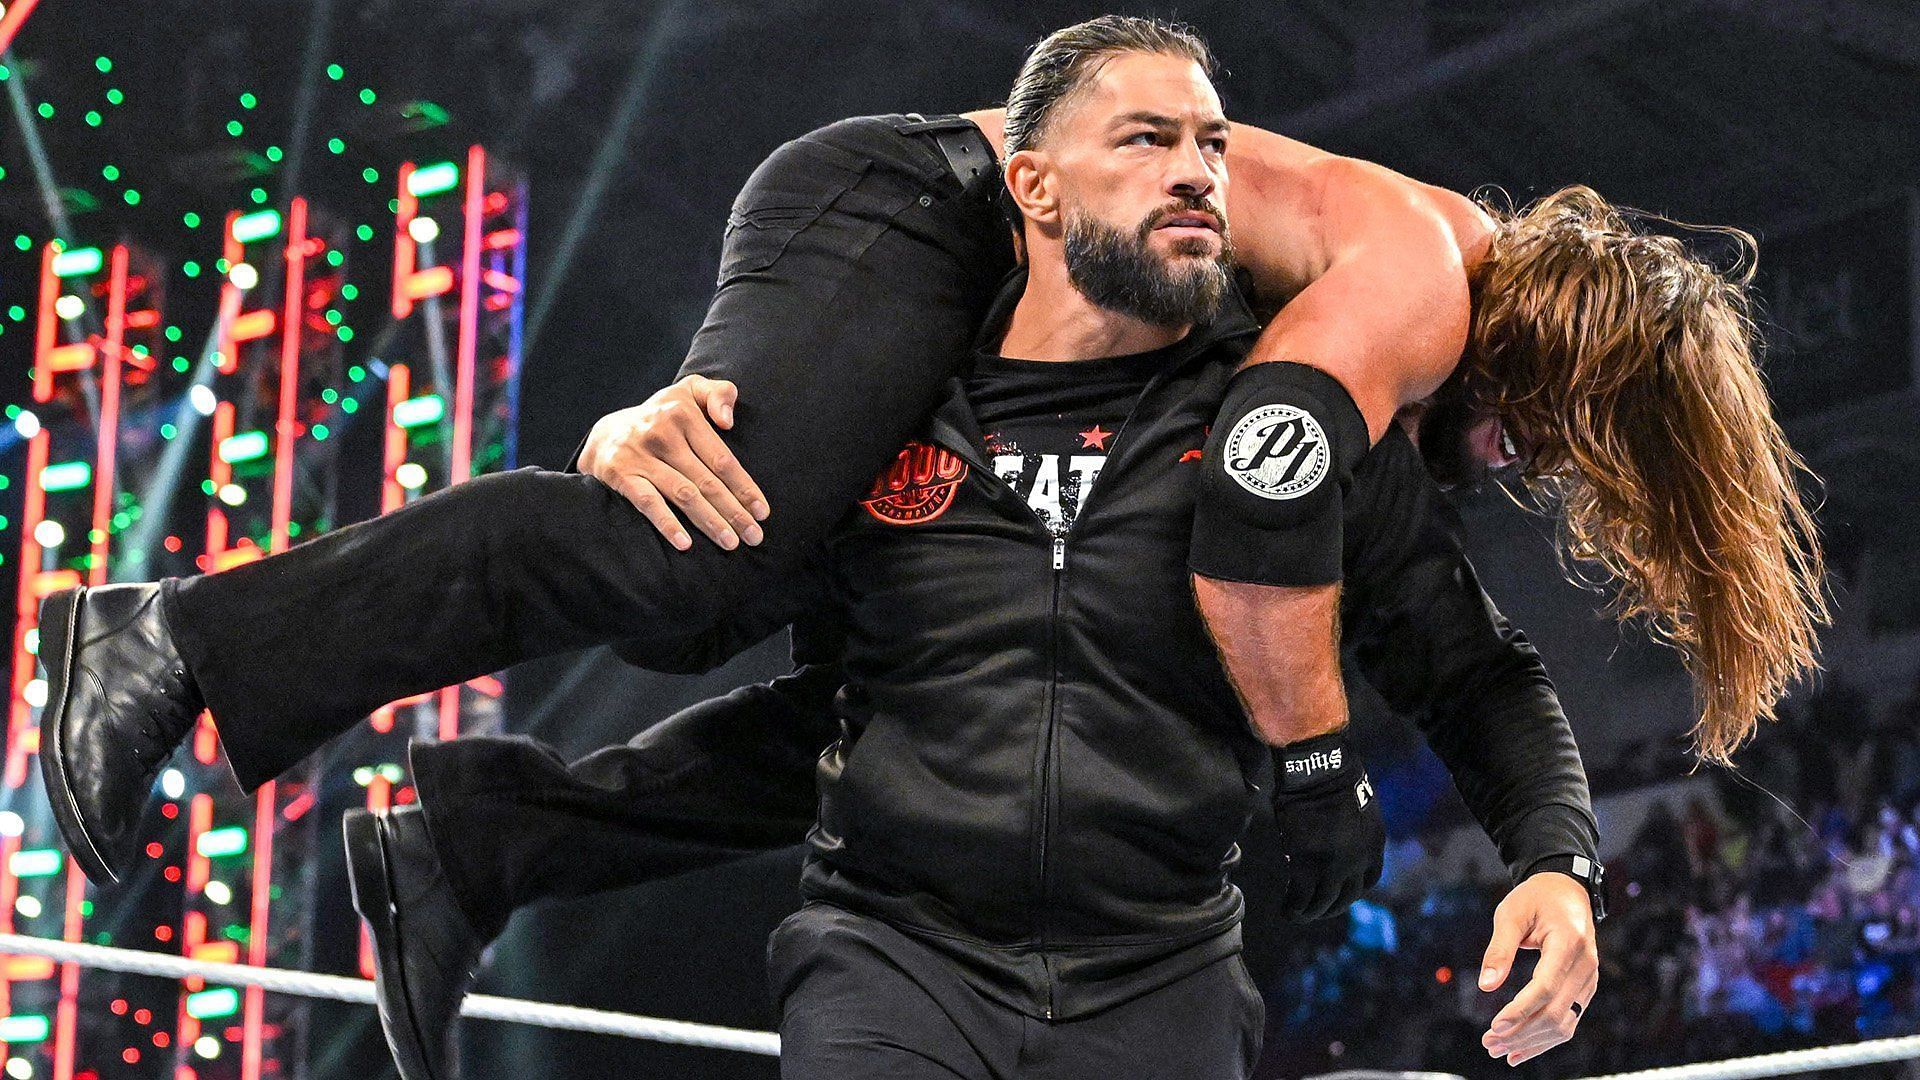 Roman Reigns attacked several WWE stars on SmackDown this week